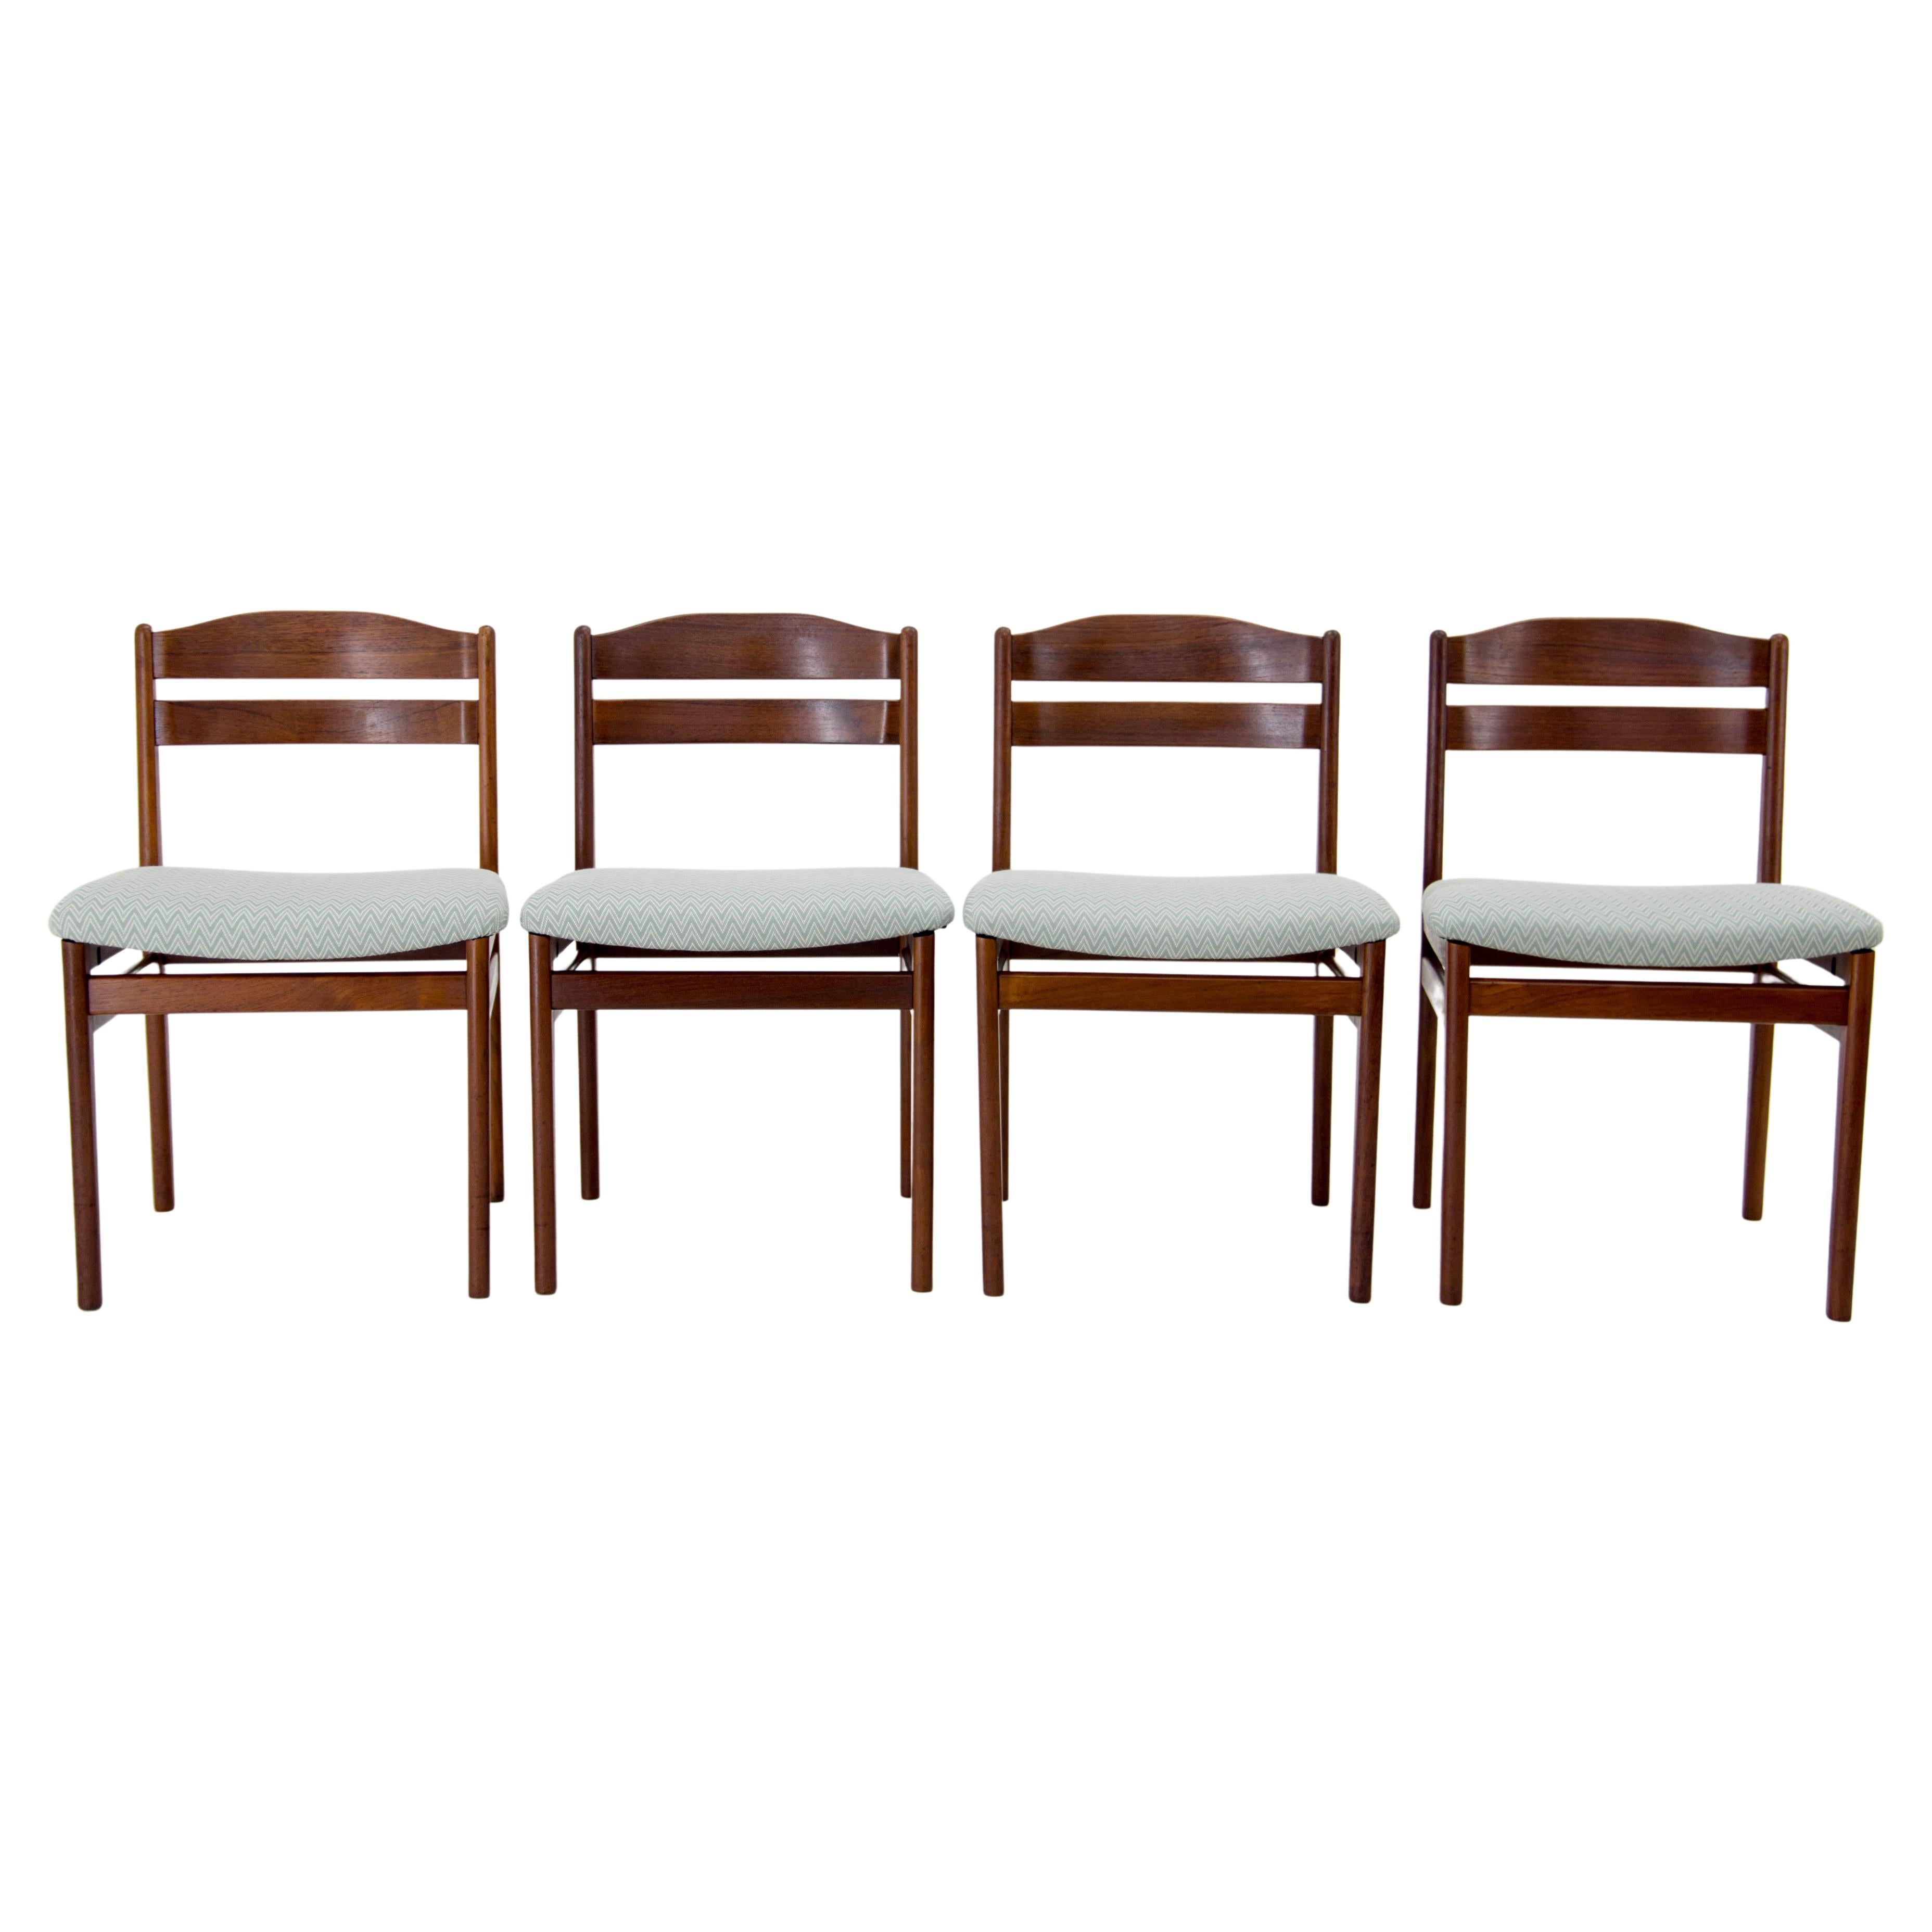 Set of Four Teak Dining Chairs, Denmark, 1960s For Sale